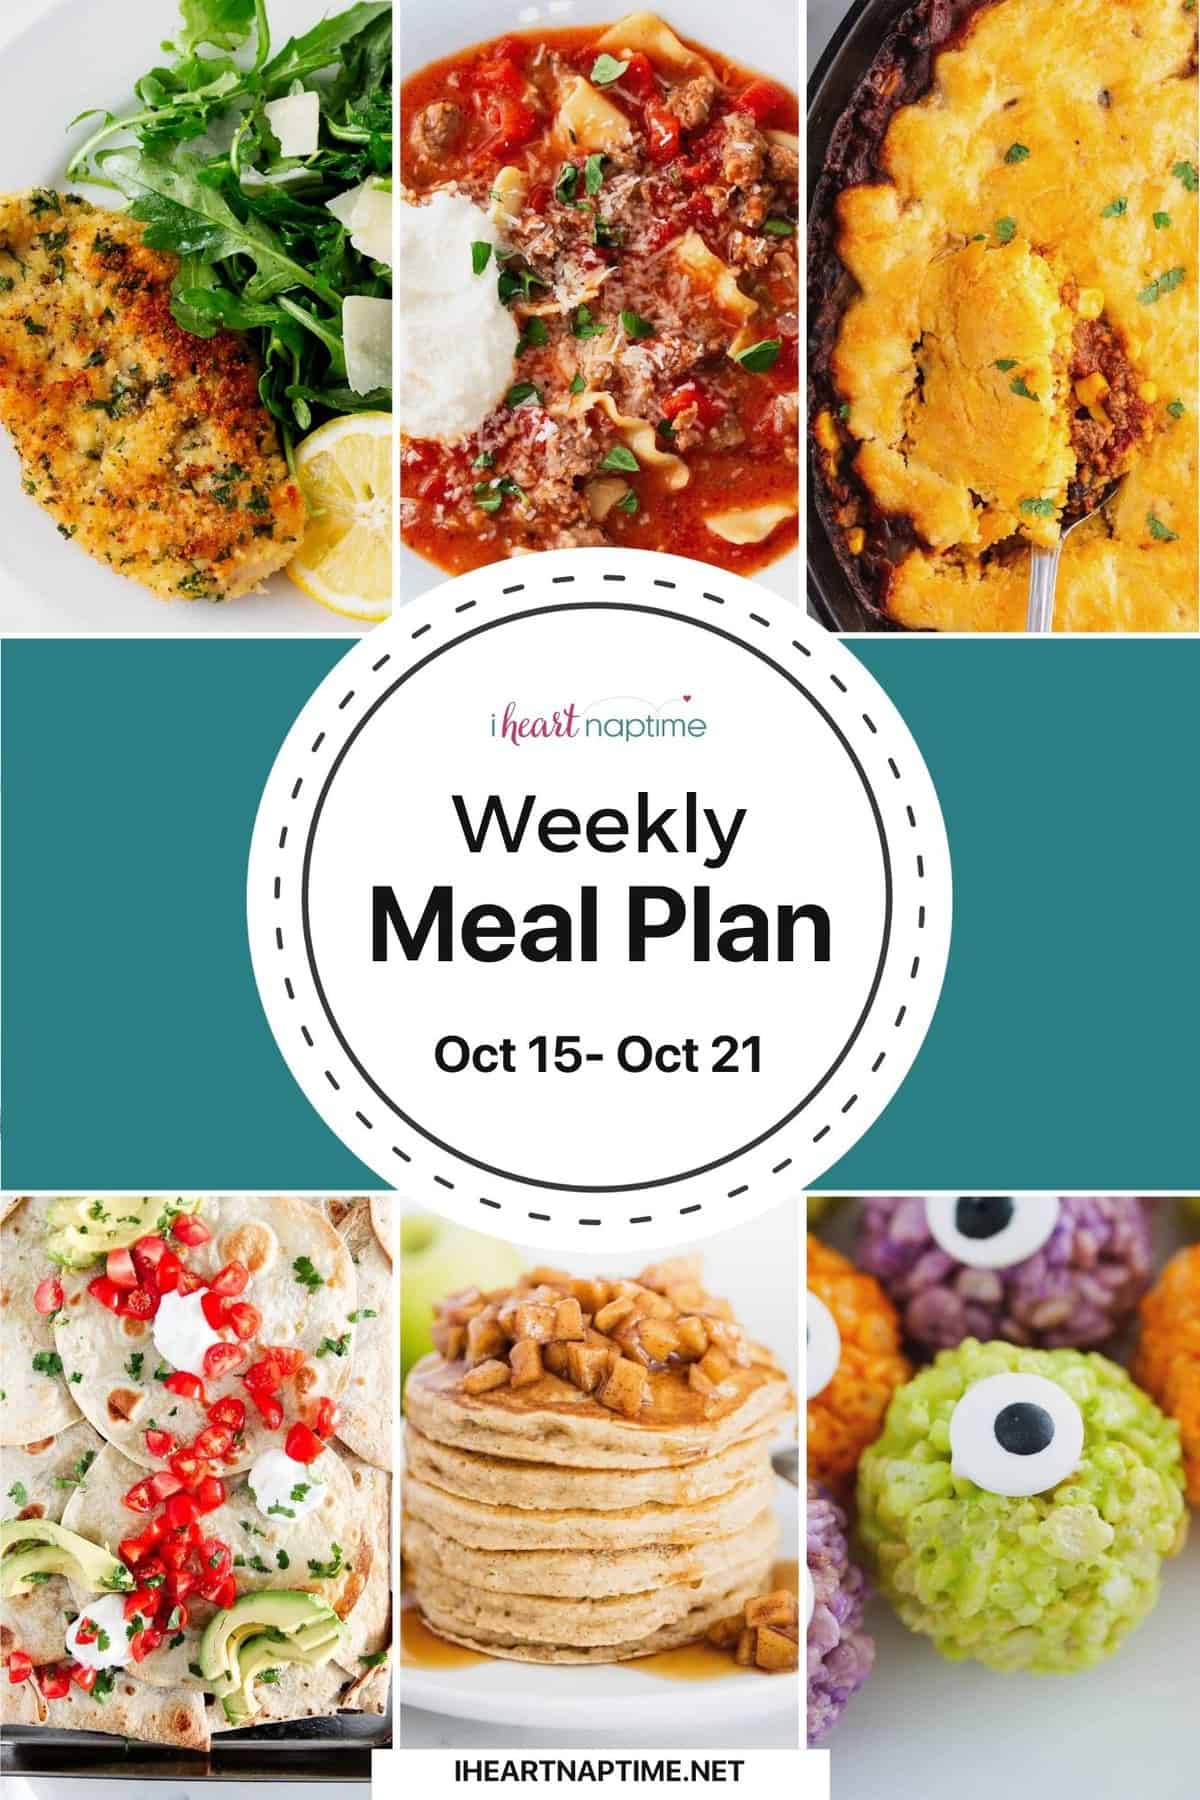 Photos of recipes from weekly meal plan for I Heart Naptime.